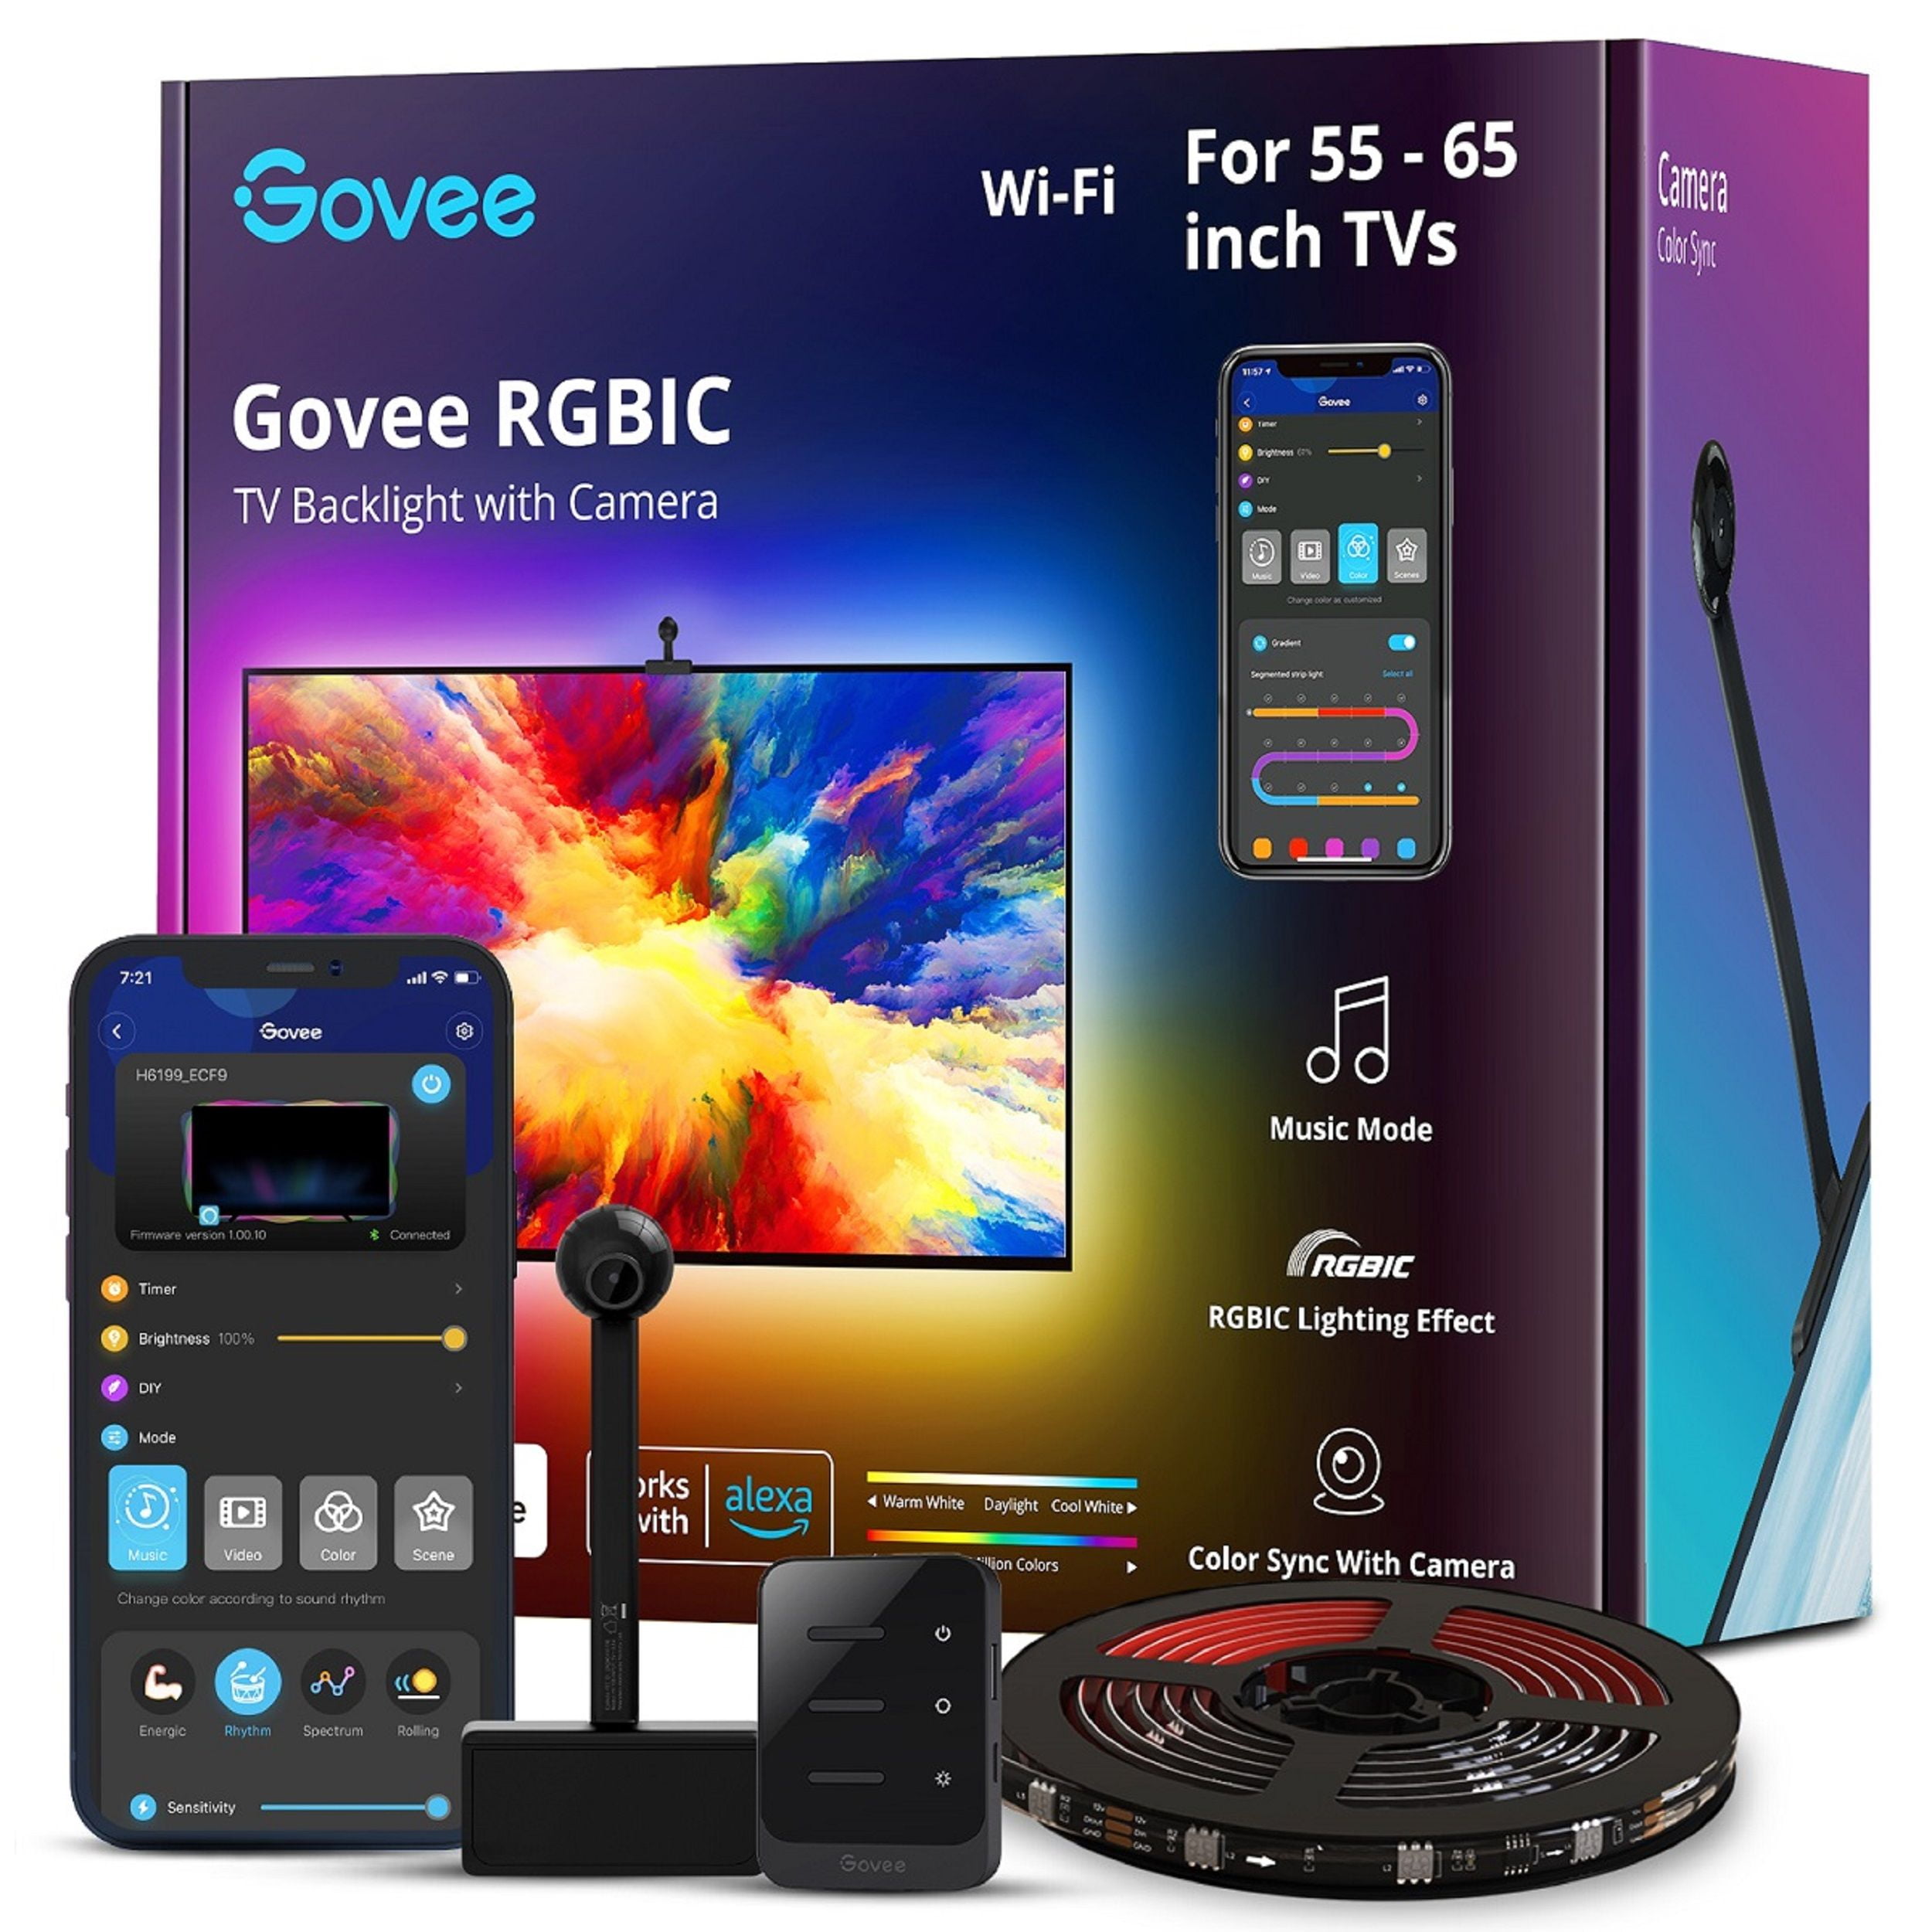  Govee Envisual TV LED Backlight with Camera, RGBIC Wi-Fi TV  Backlights for 55-65 inch TVs, Works with Alexa & Google Assistant, App  Control, Music Sync Lights, H6199 : Tools & Home